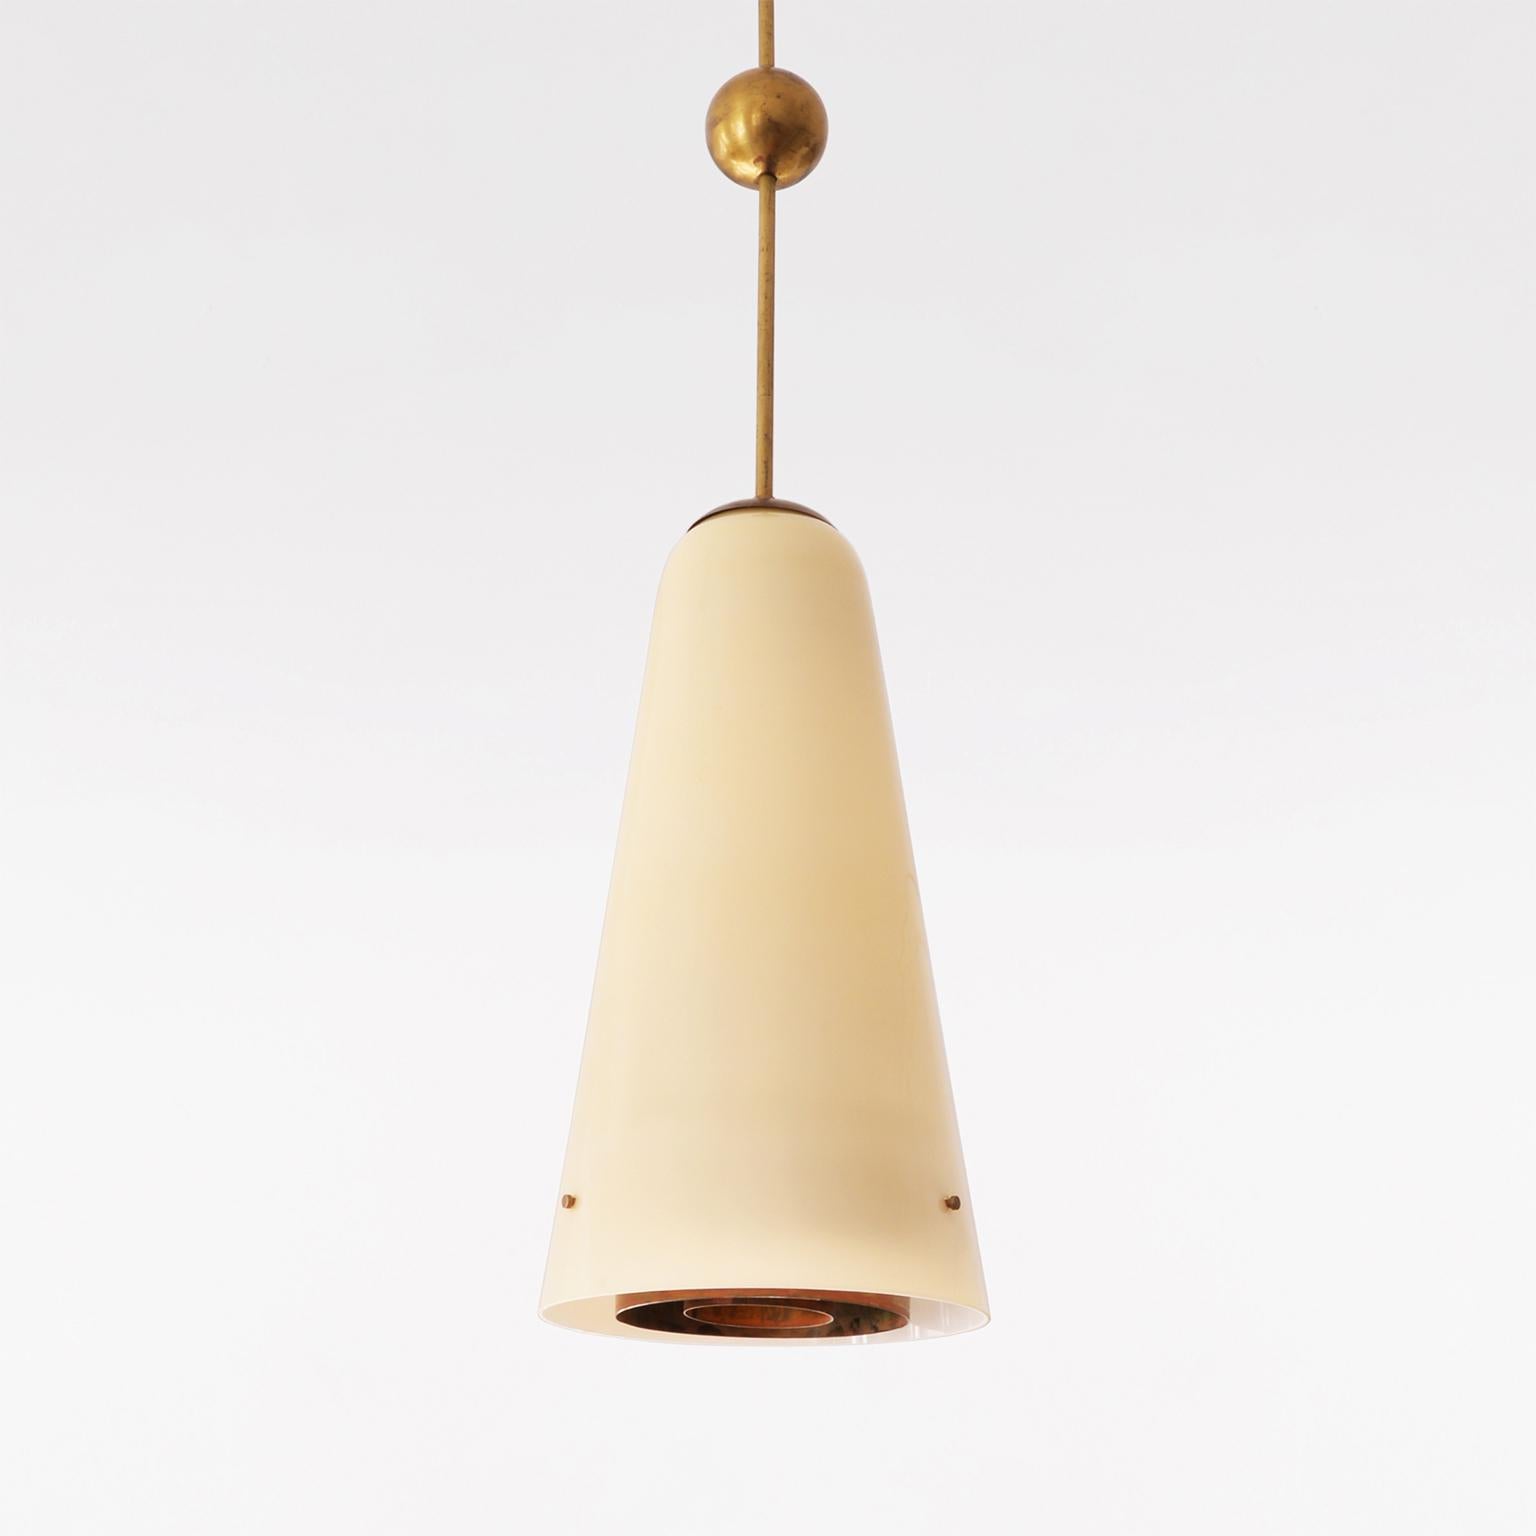 Ceiling light designed by Paavo Tynell, manufactured by Taito Oy, Finland, c. 1950